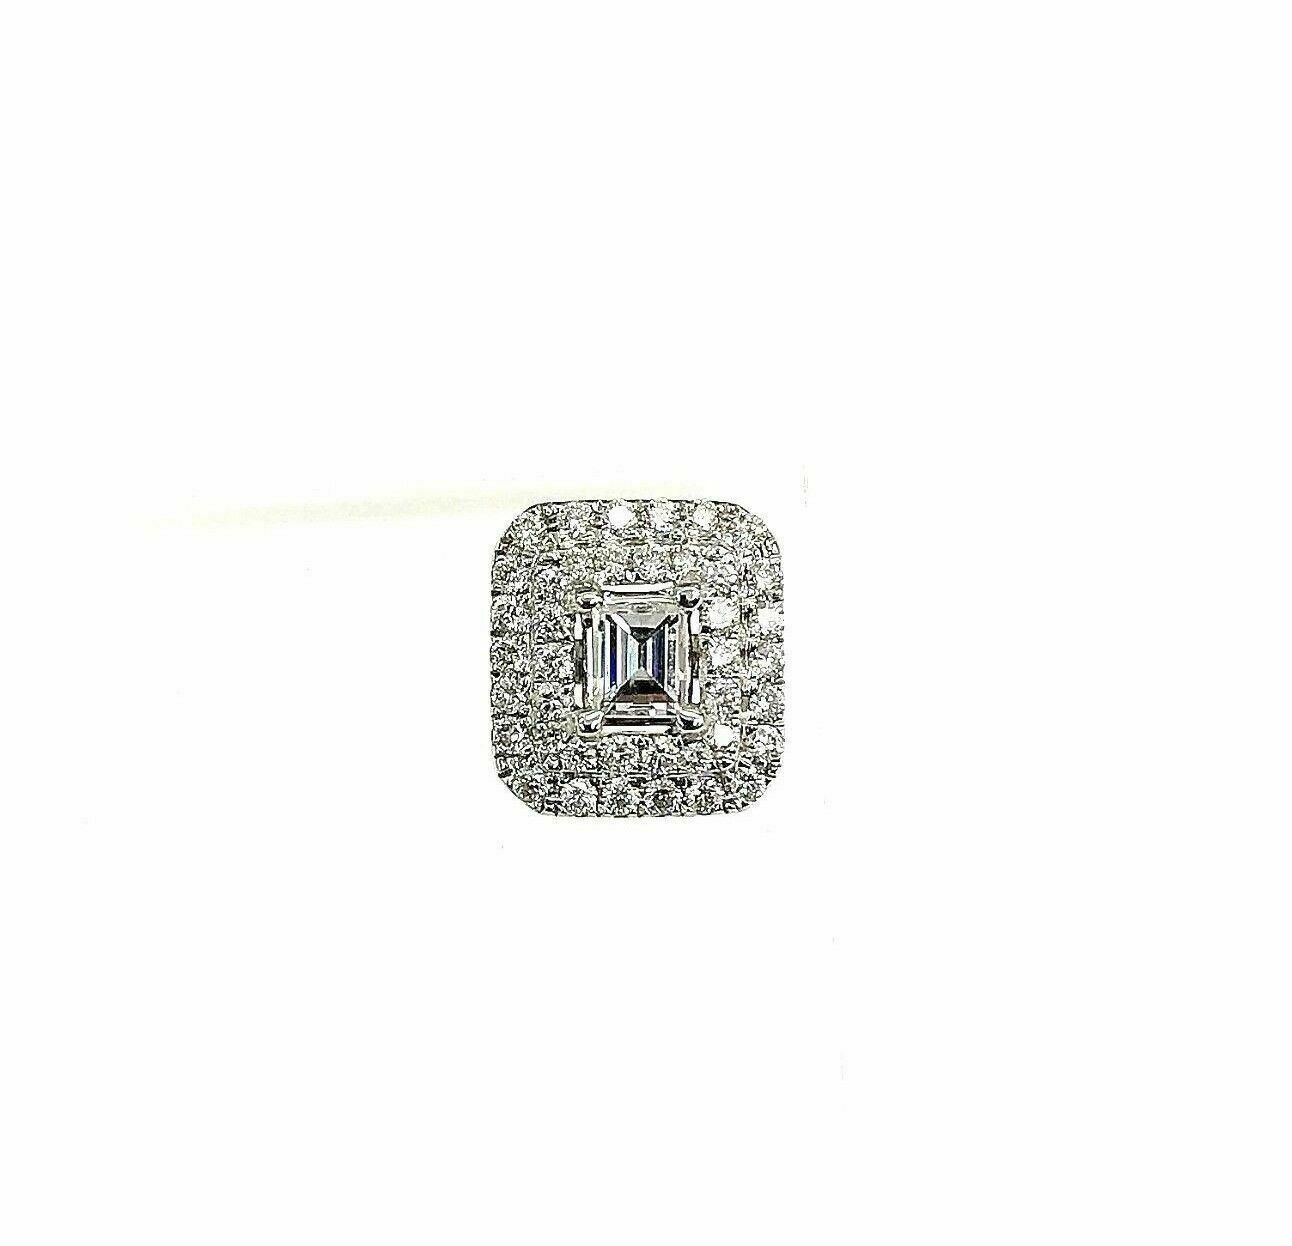 1.33 Carats t.w. Carre Baguette and Round Diamond Halo Earrings 14K White Gold